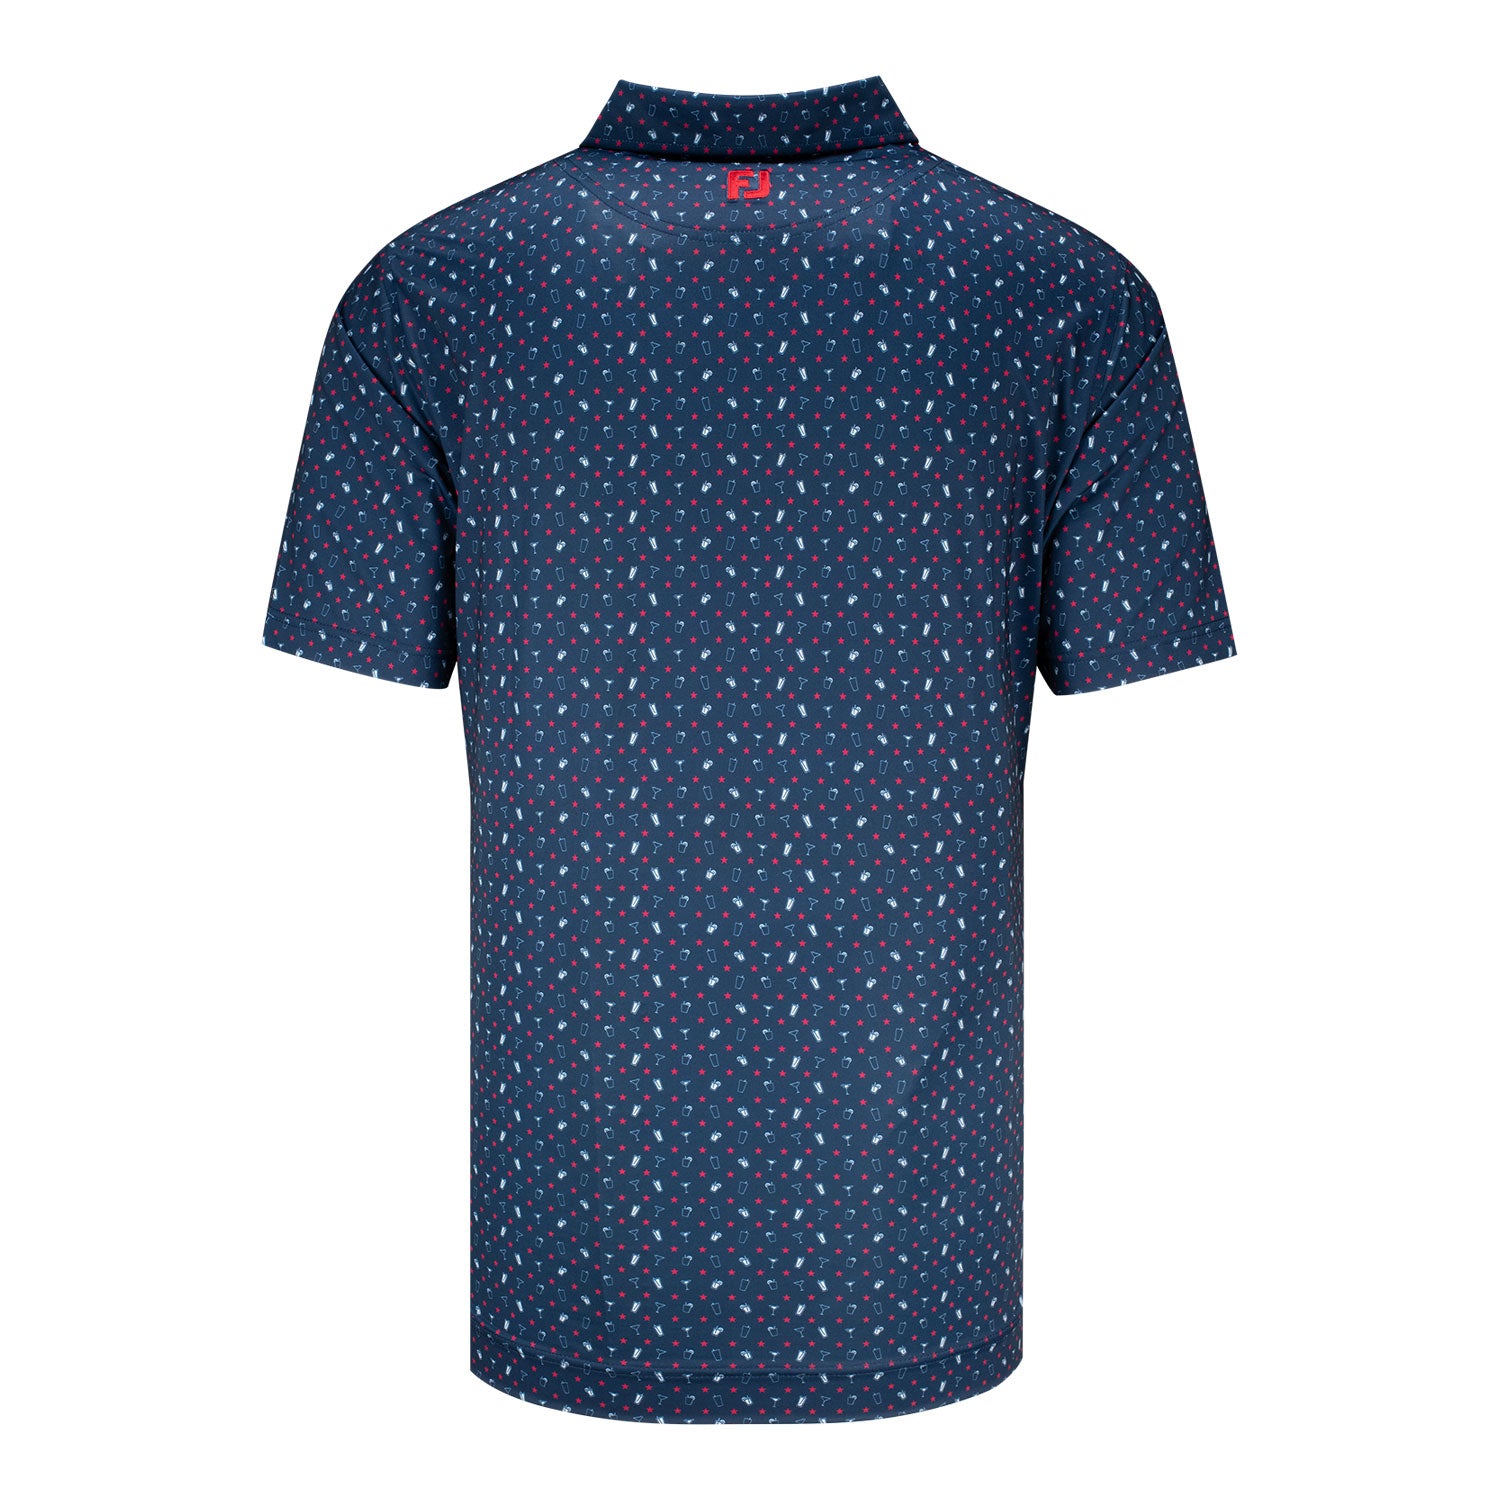 FootJoy 2025 Ryder Cup Star Cocktail Pattern Polo in Navy - Front View